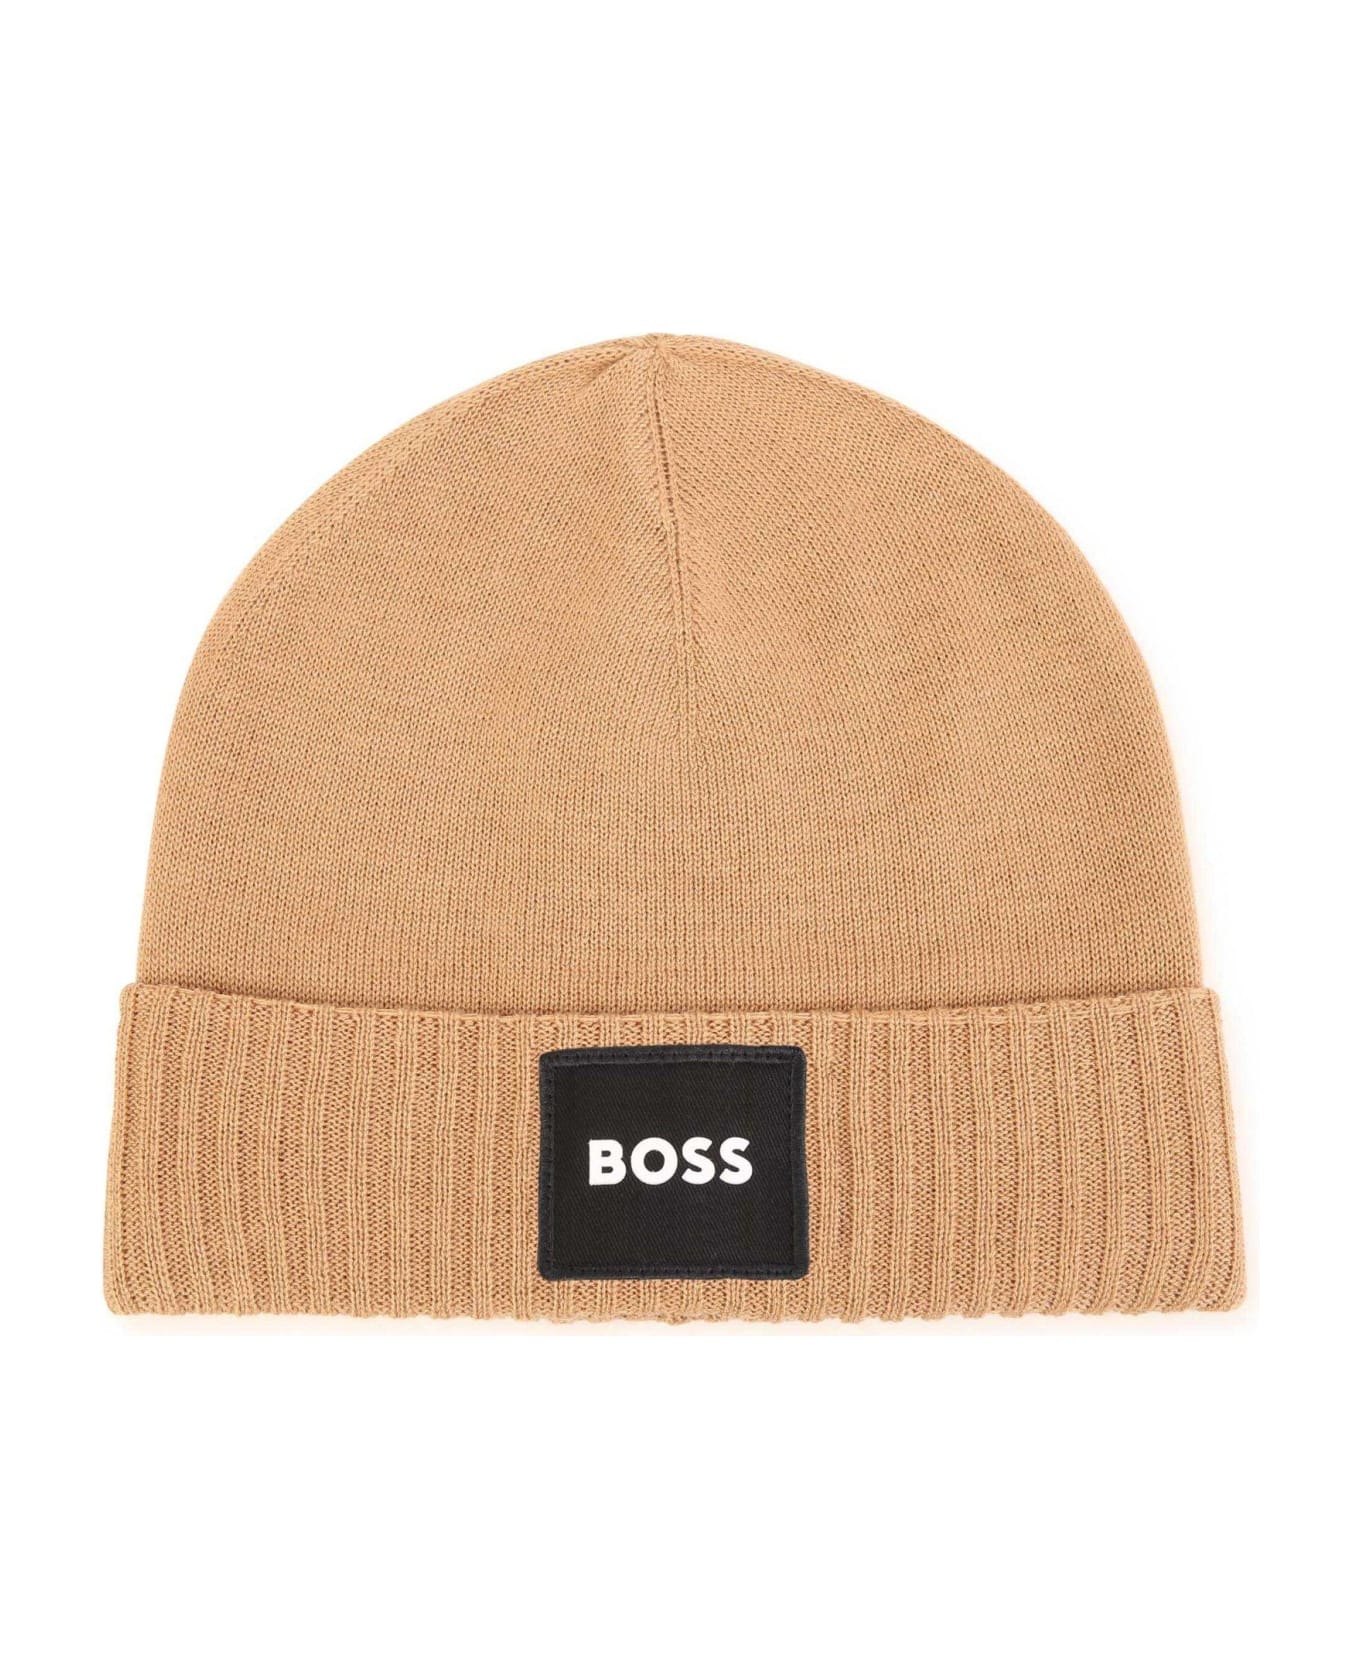 Hugo Boss Logo Patch Knitted Beanie - Beige アクセサリー＆ギフト